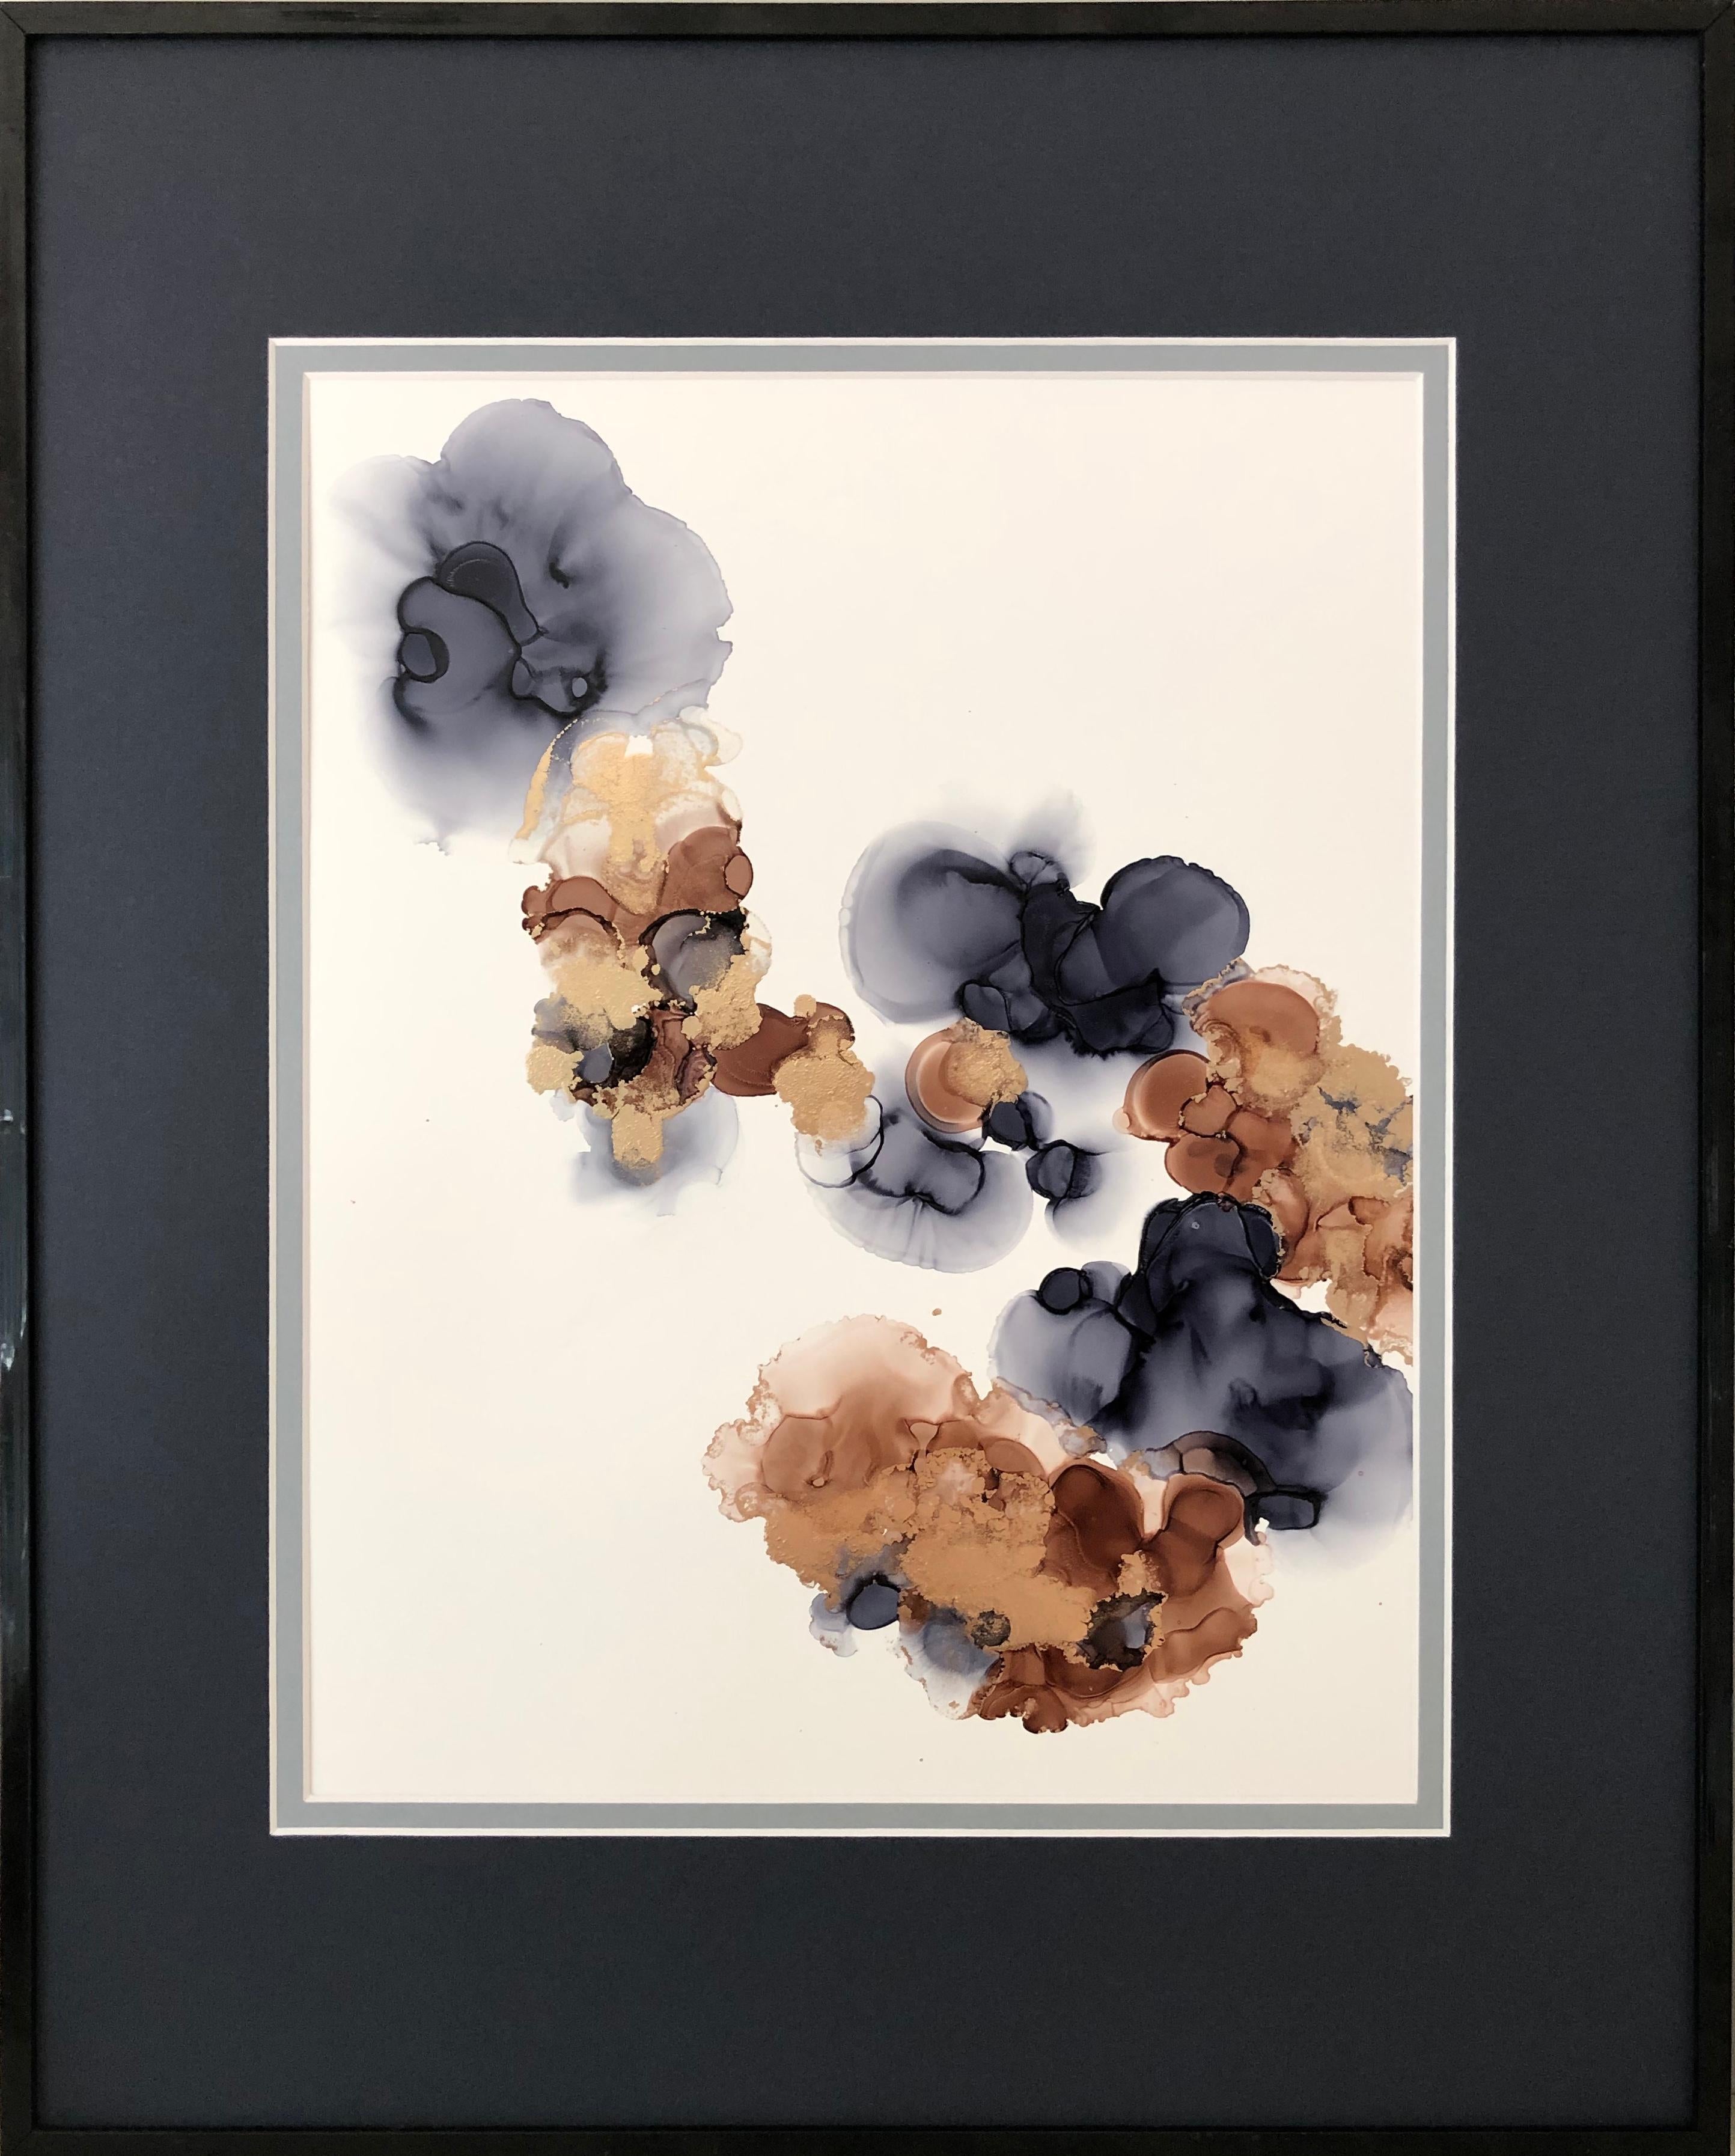 Delicacy - abstraction art, made in gold, brown, gray and navy blue  - Art by Mila Akopova